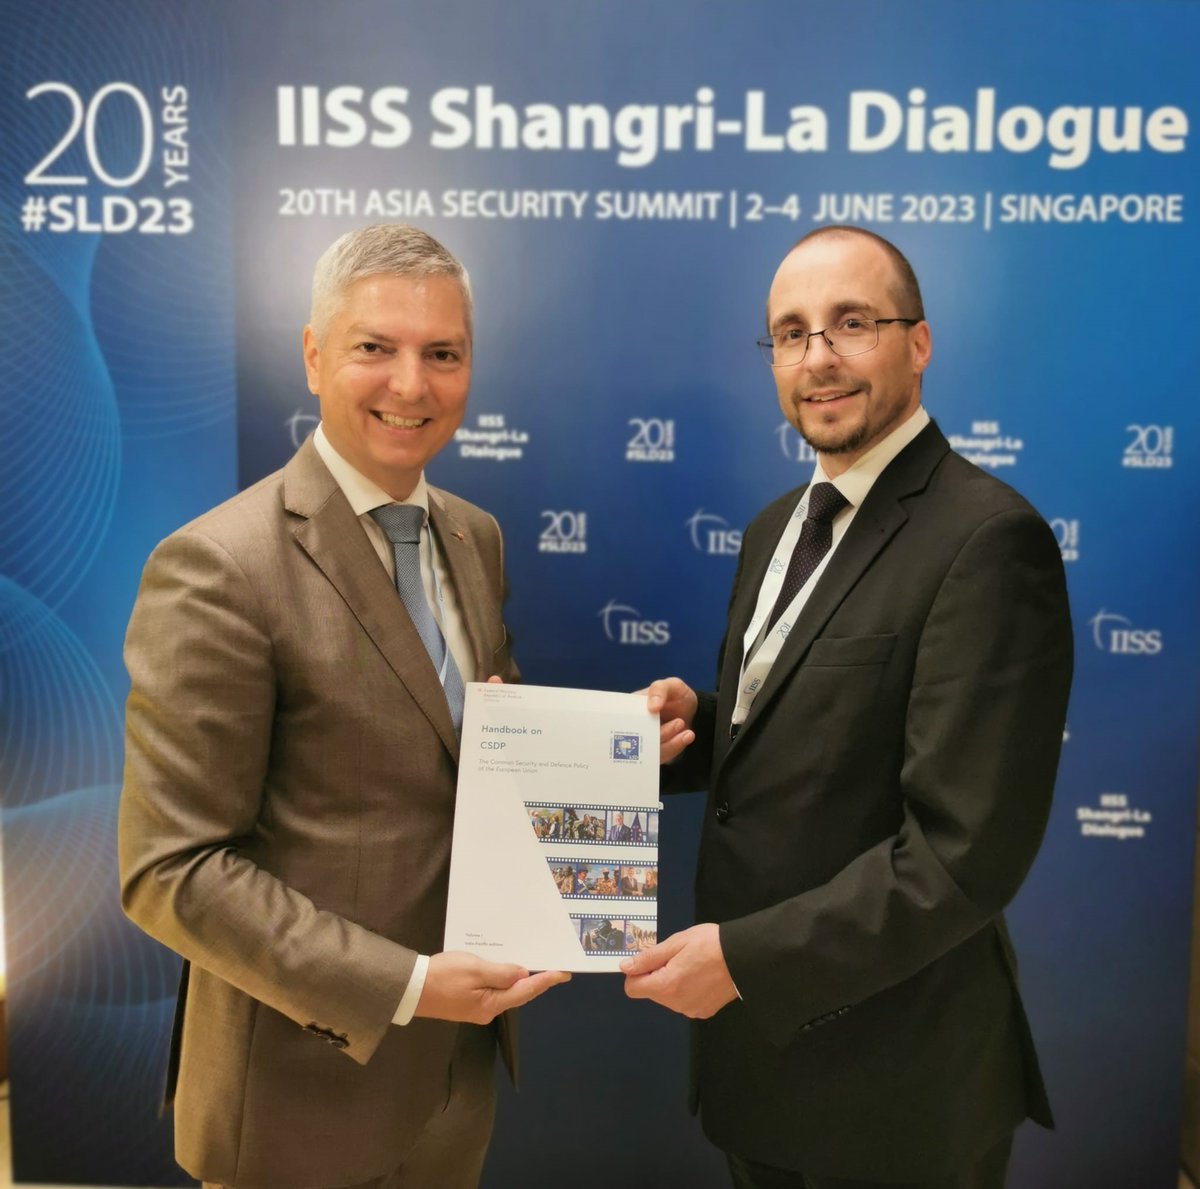 #EU #CSDP Handbook, Indo-Pacific Edition (Singapore version) being shared by Dr. Arnold Kammel (General Secretary Austrian MoD) and Dr. @JochenRehrl in and around the #SLD23 Shangri-La Dialogue over the weekend.
@EUinSingapore